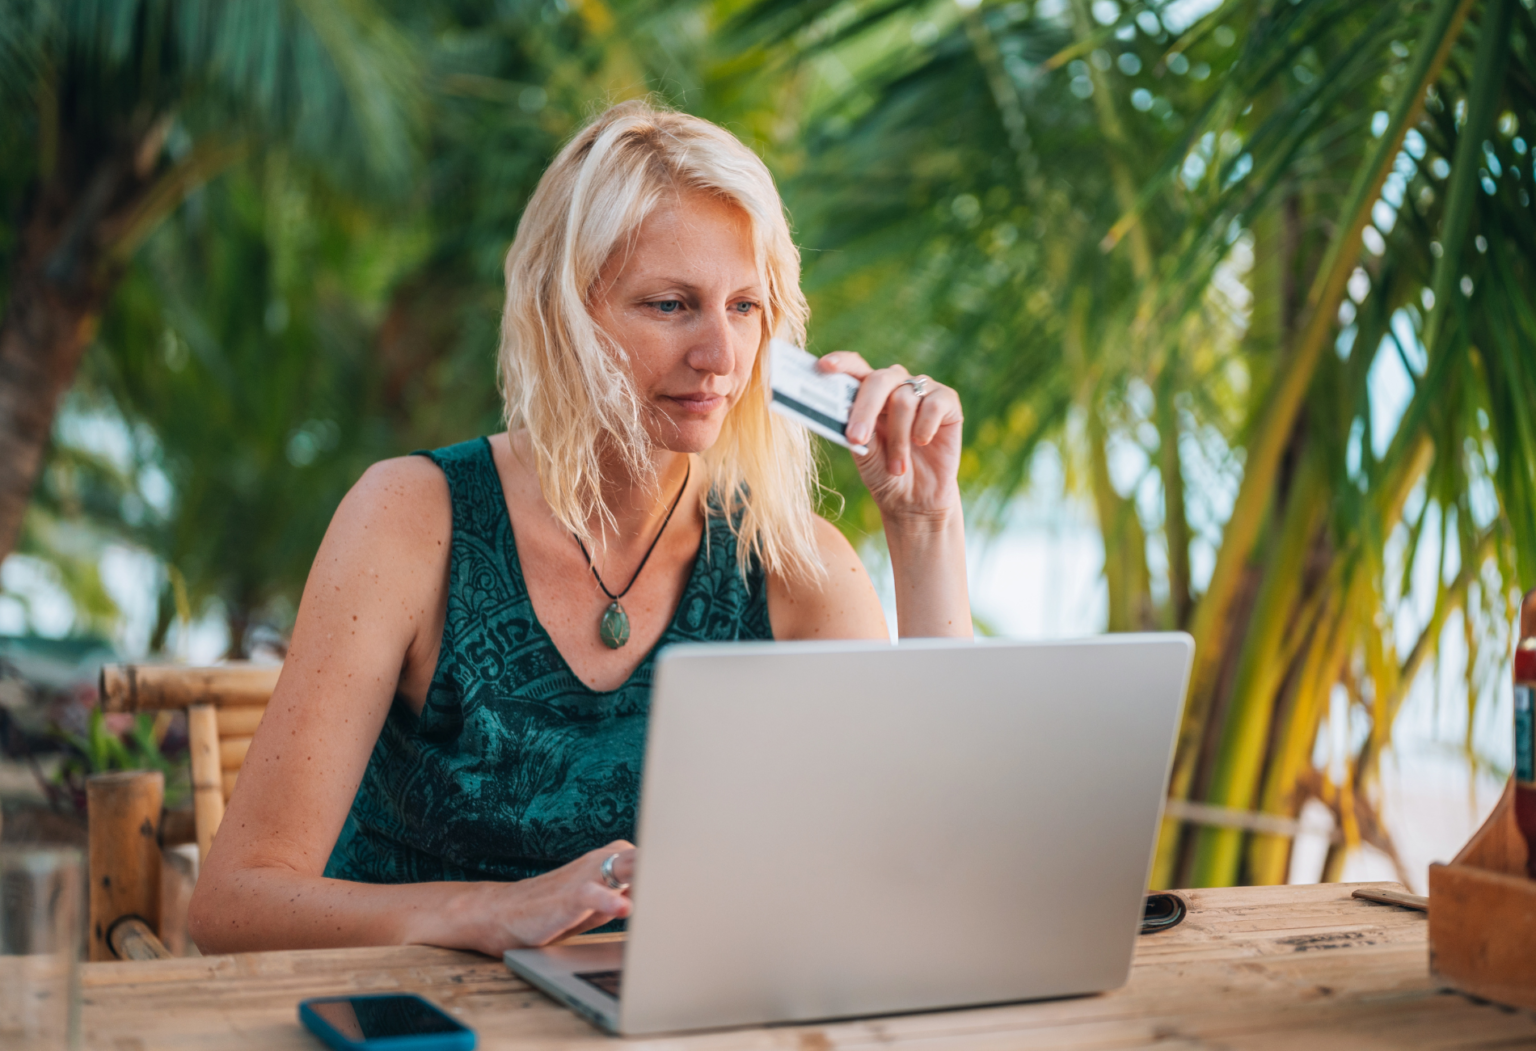 blonde woman holding credit card while shopping on laptop in a tropical setting